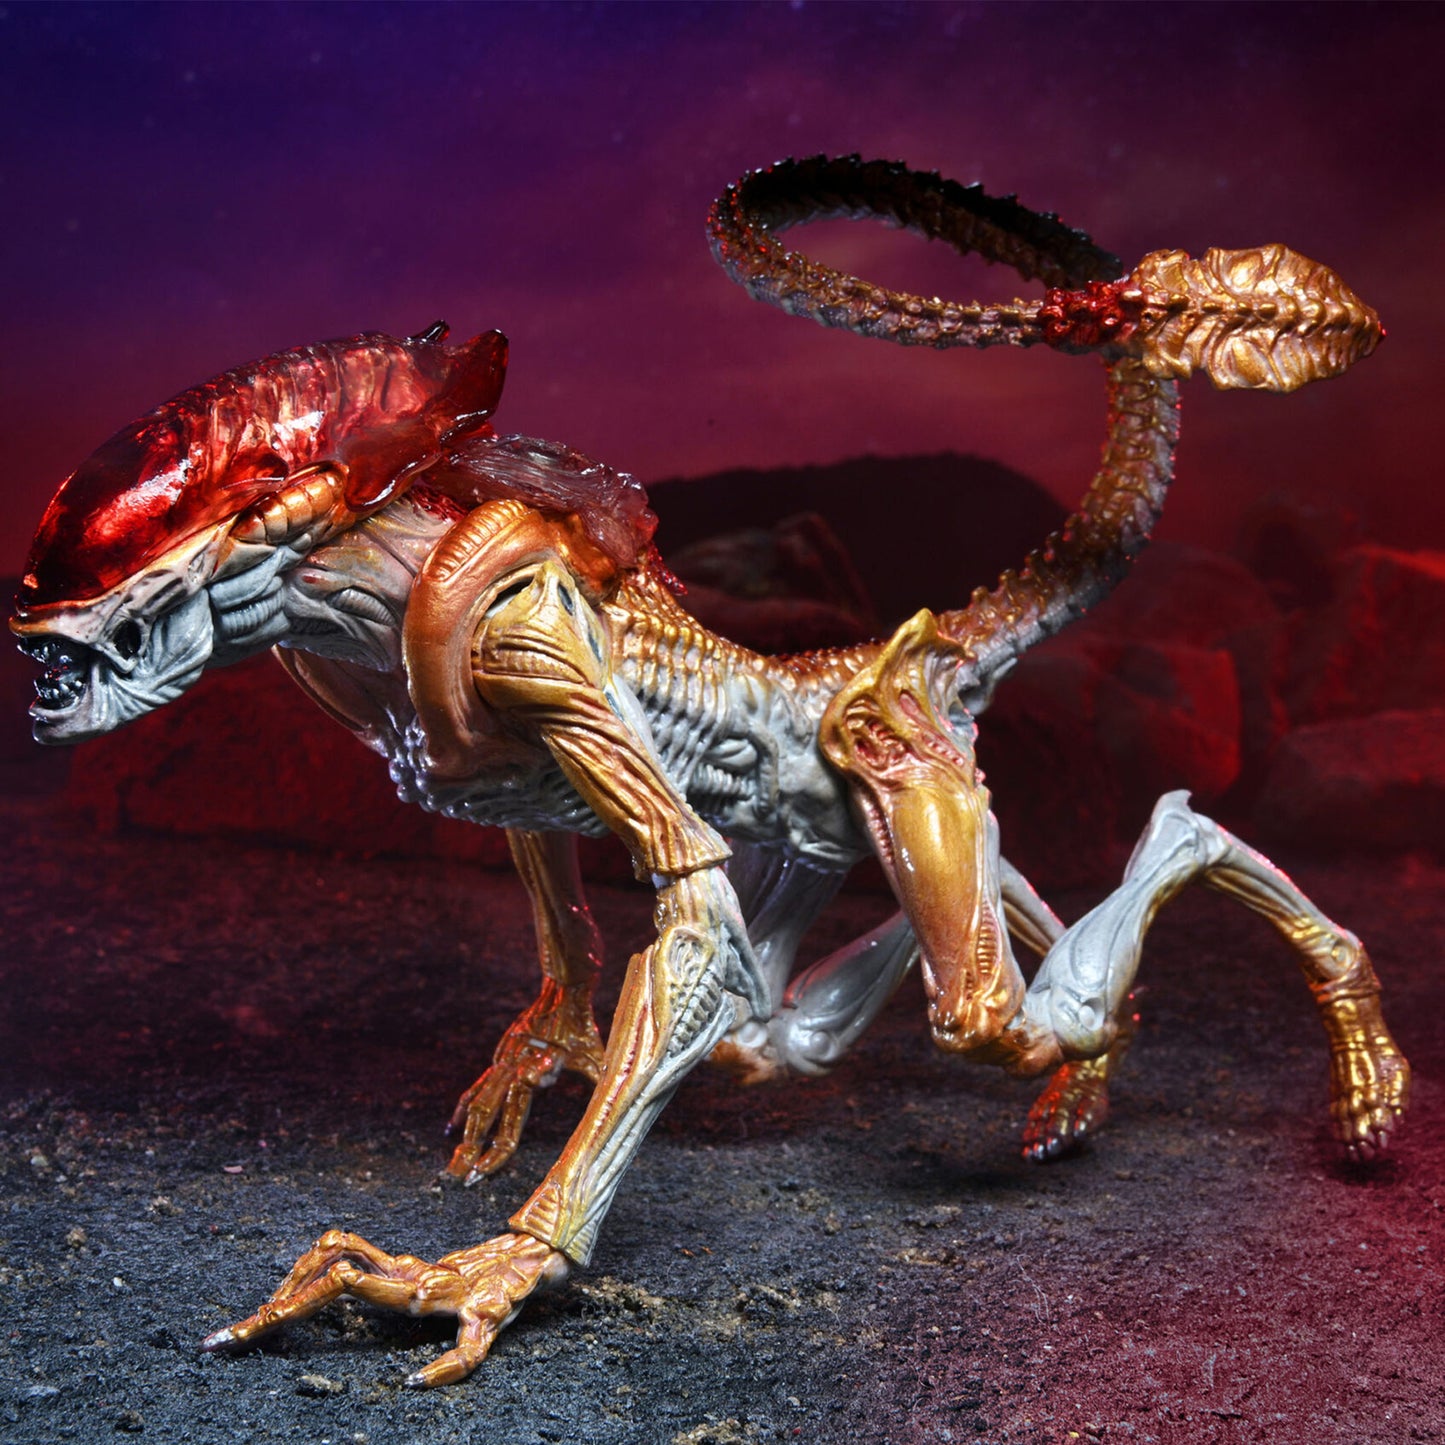 Panther Alien NECA 7" Scale Kenner Tribute Action Figure